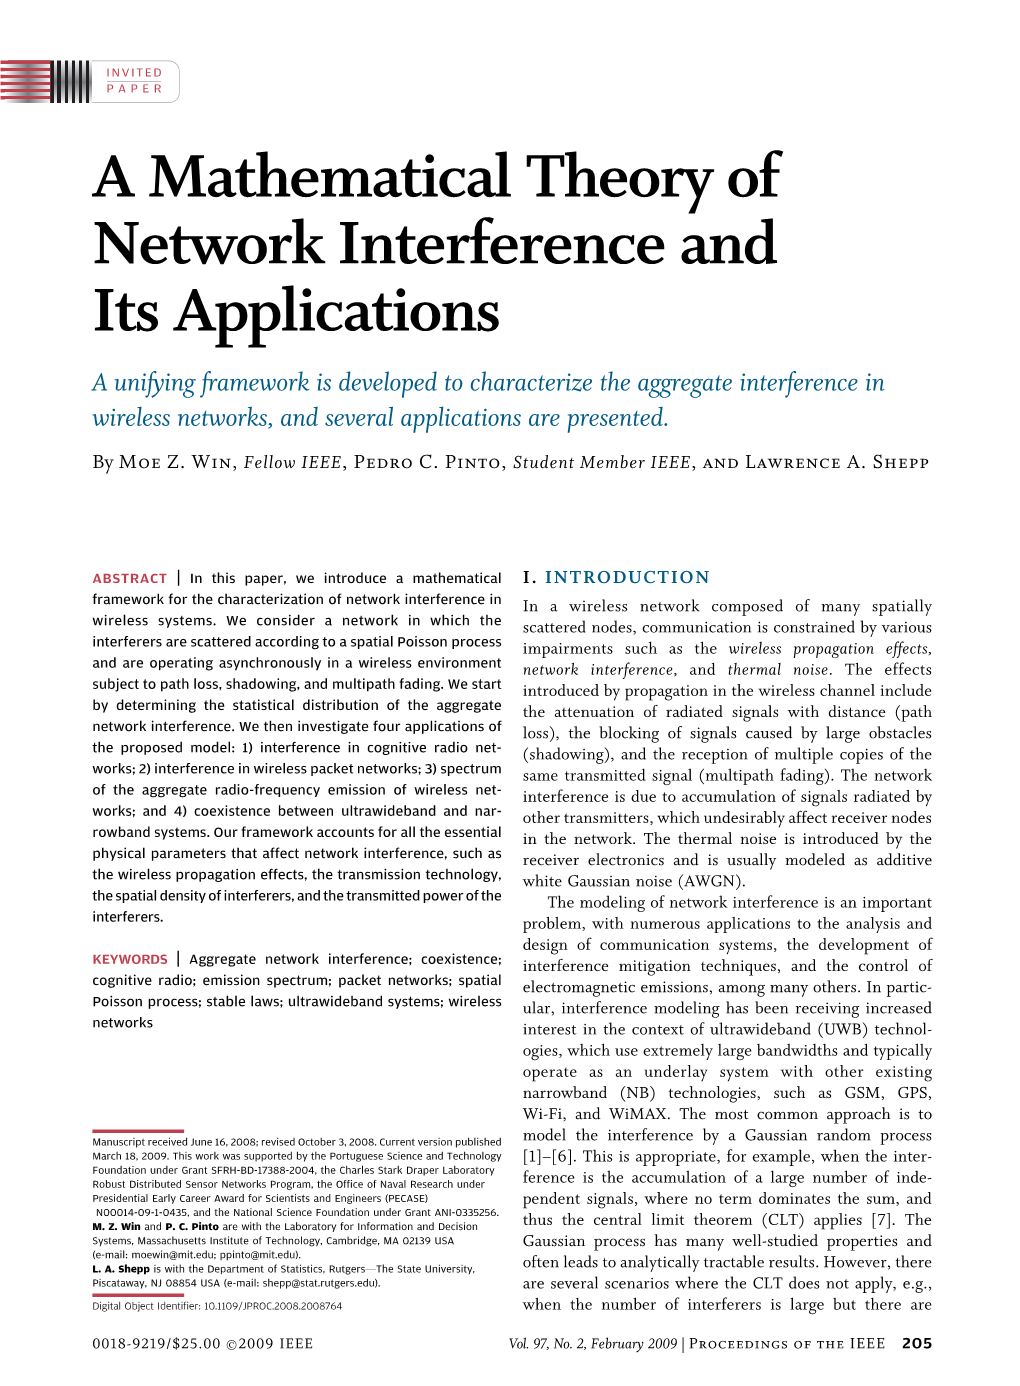 A Mathematical Theory of Network Interference and Its Applications